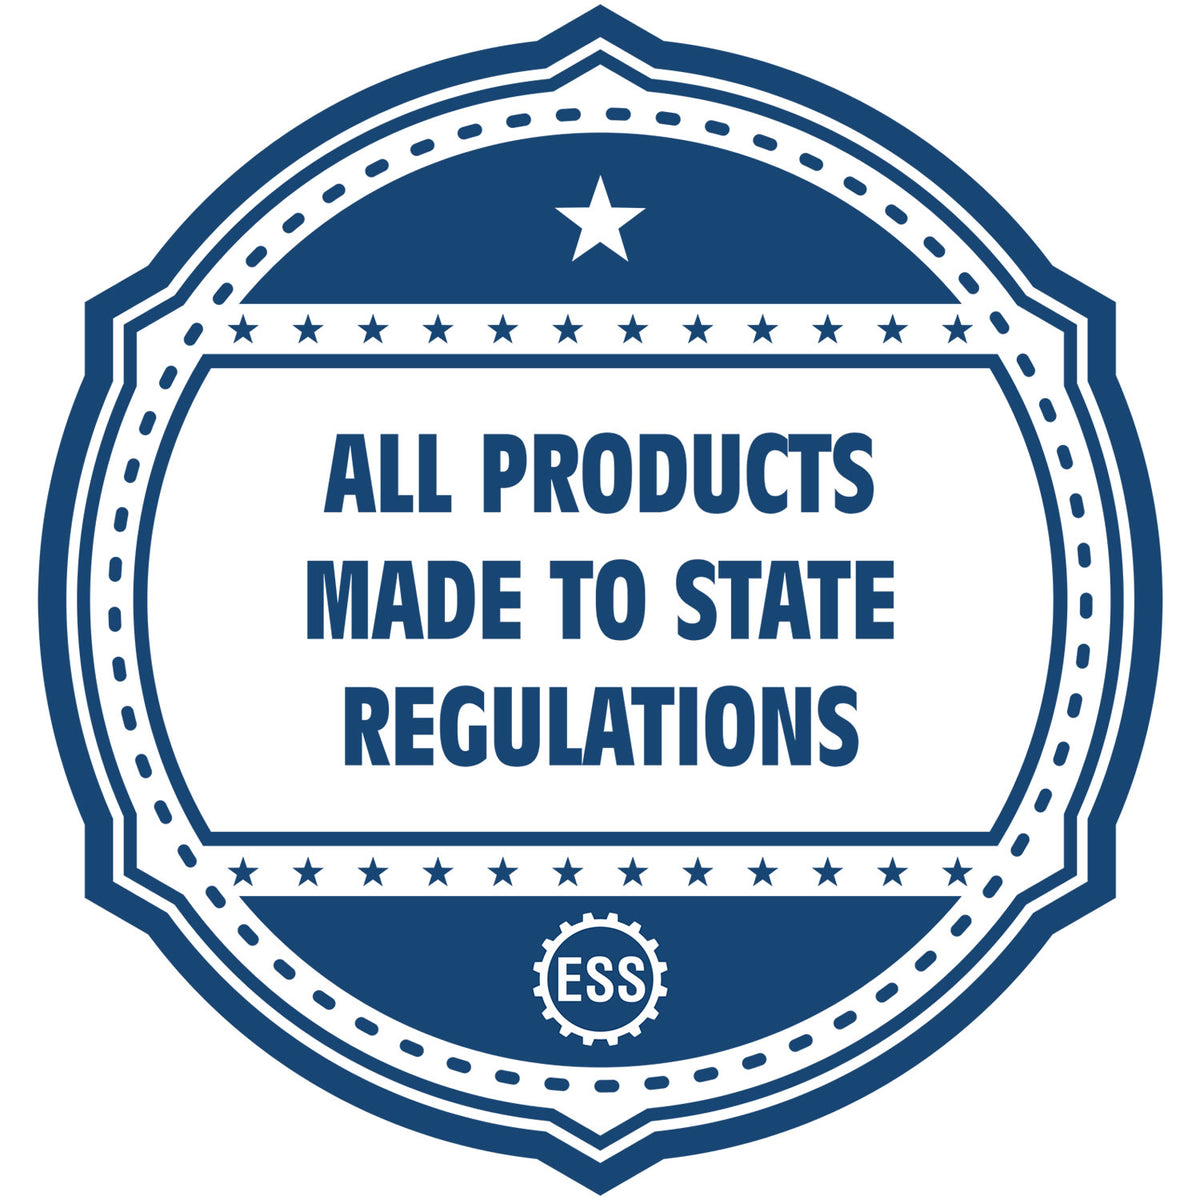 A blue icon or badge for the Hybrid Maryland Landscape Architect Seal showing that this product is made in compliance with state regulations.